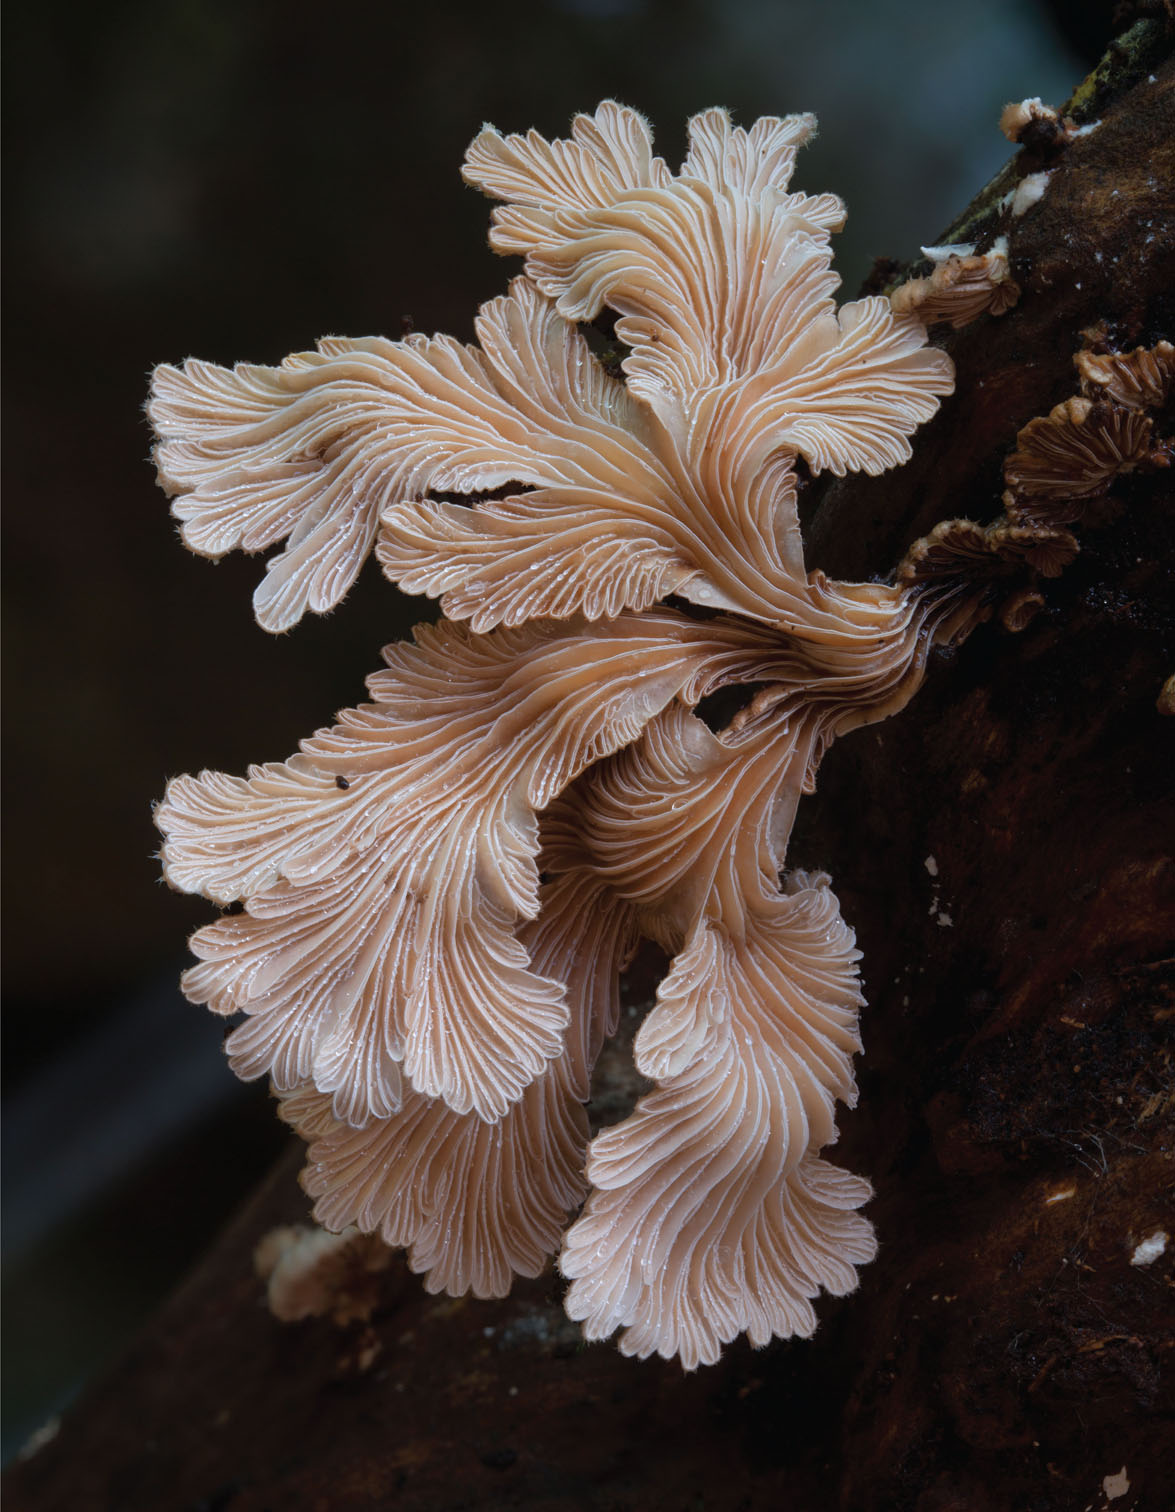 93. Schizophyllum commune fungi. The renowned mycologist Paul Stamets has described fungi as ‘the grand molecular disassemblers of nature’101